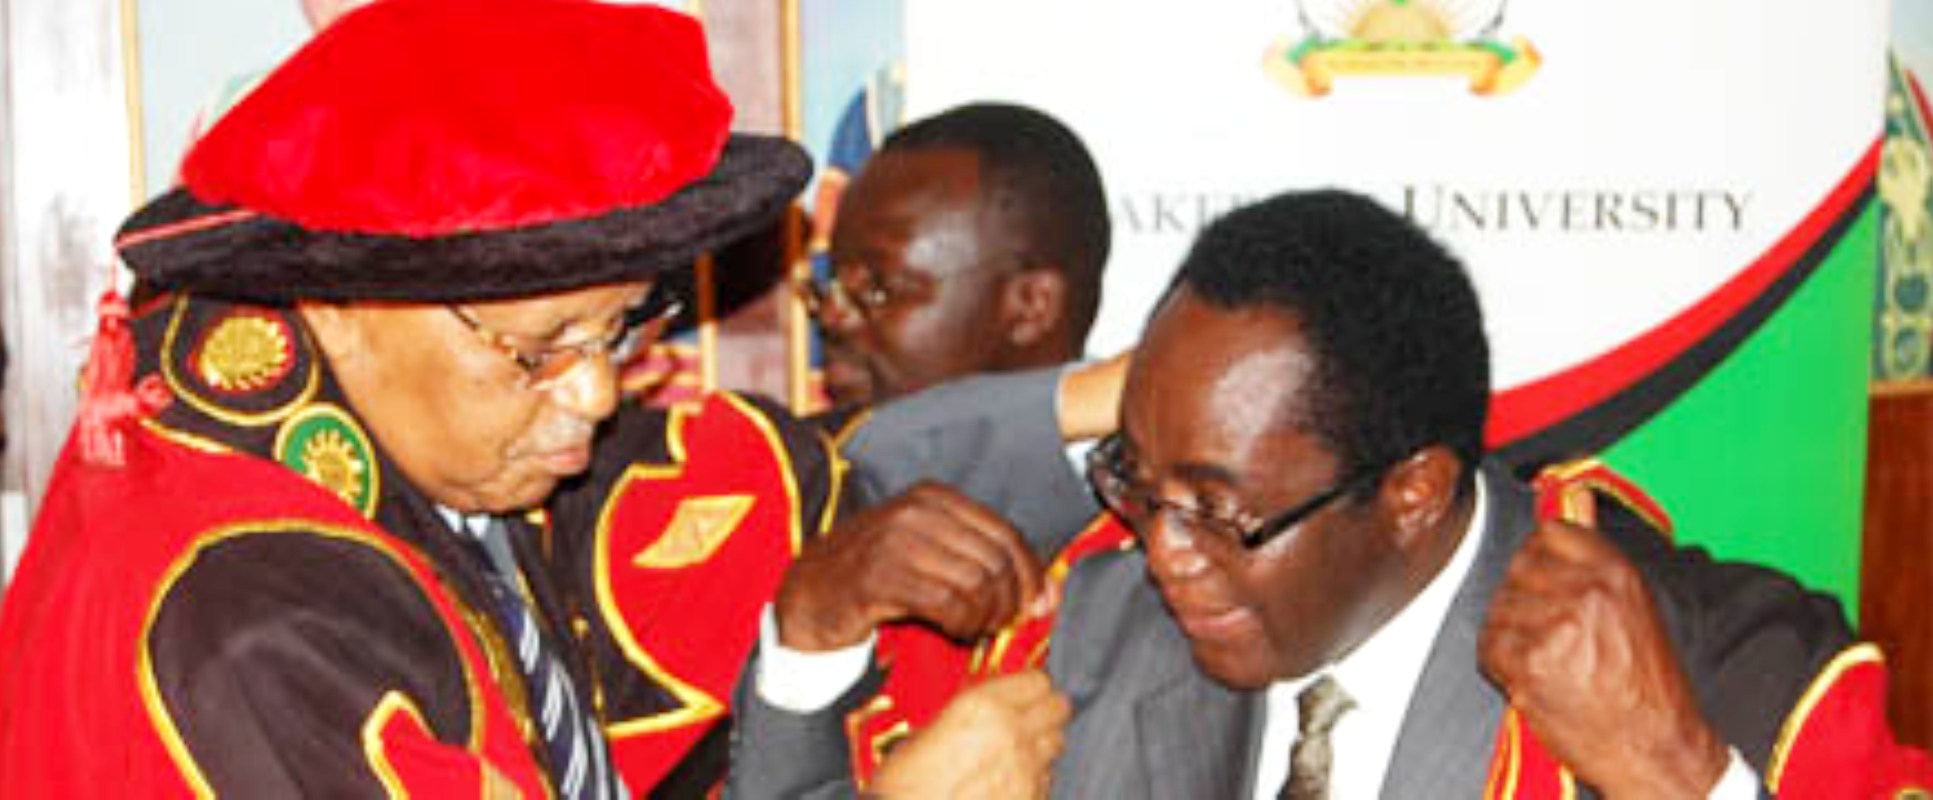 The Chancellor, Prof. Mondo Kagonyera (L) robes the new Vice Chancellor, Prof. John Ddumba Ssentamu (R) with his official gown during the handover ceremony on 6th September 2012, Council Room, Makerere University.